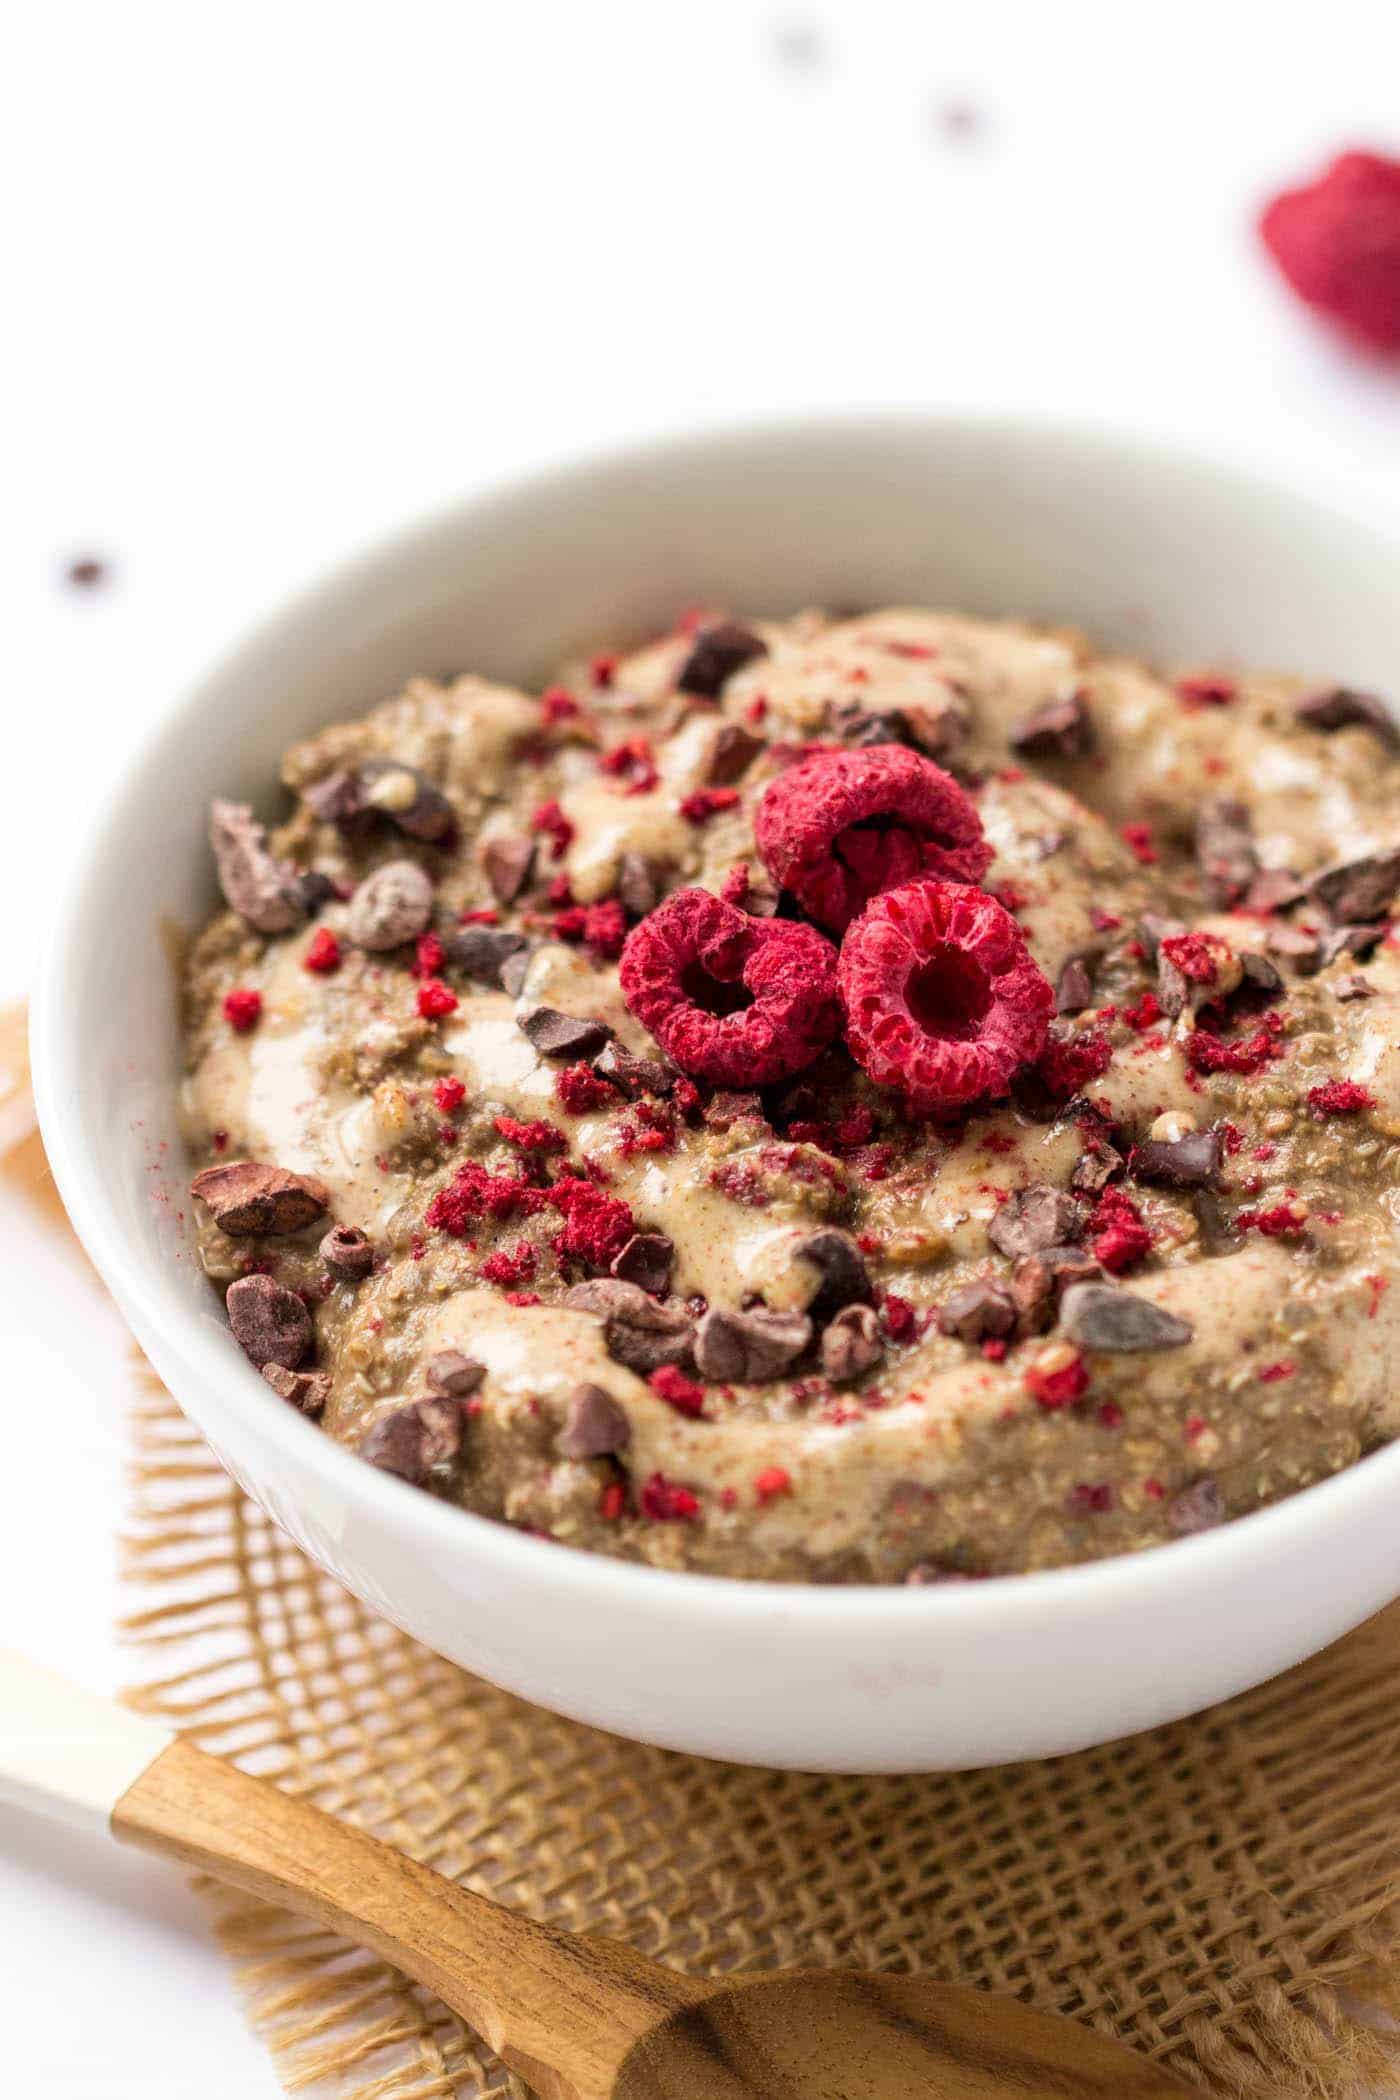 Tired of the same boring bowl of oatmeal? Time to try overnight quinoa instead! (especially when it tastes like brownies!)